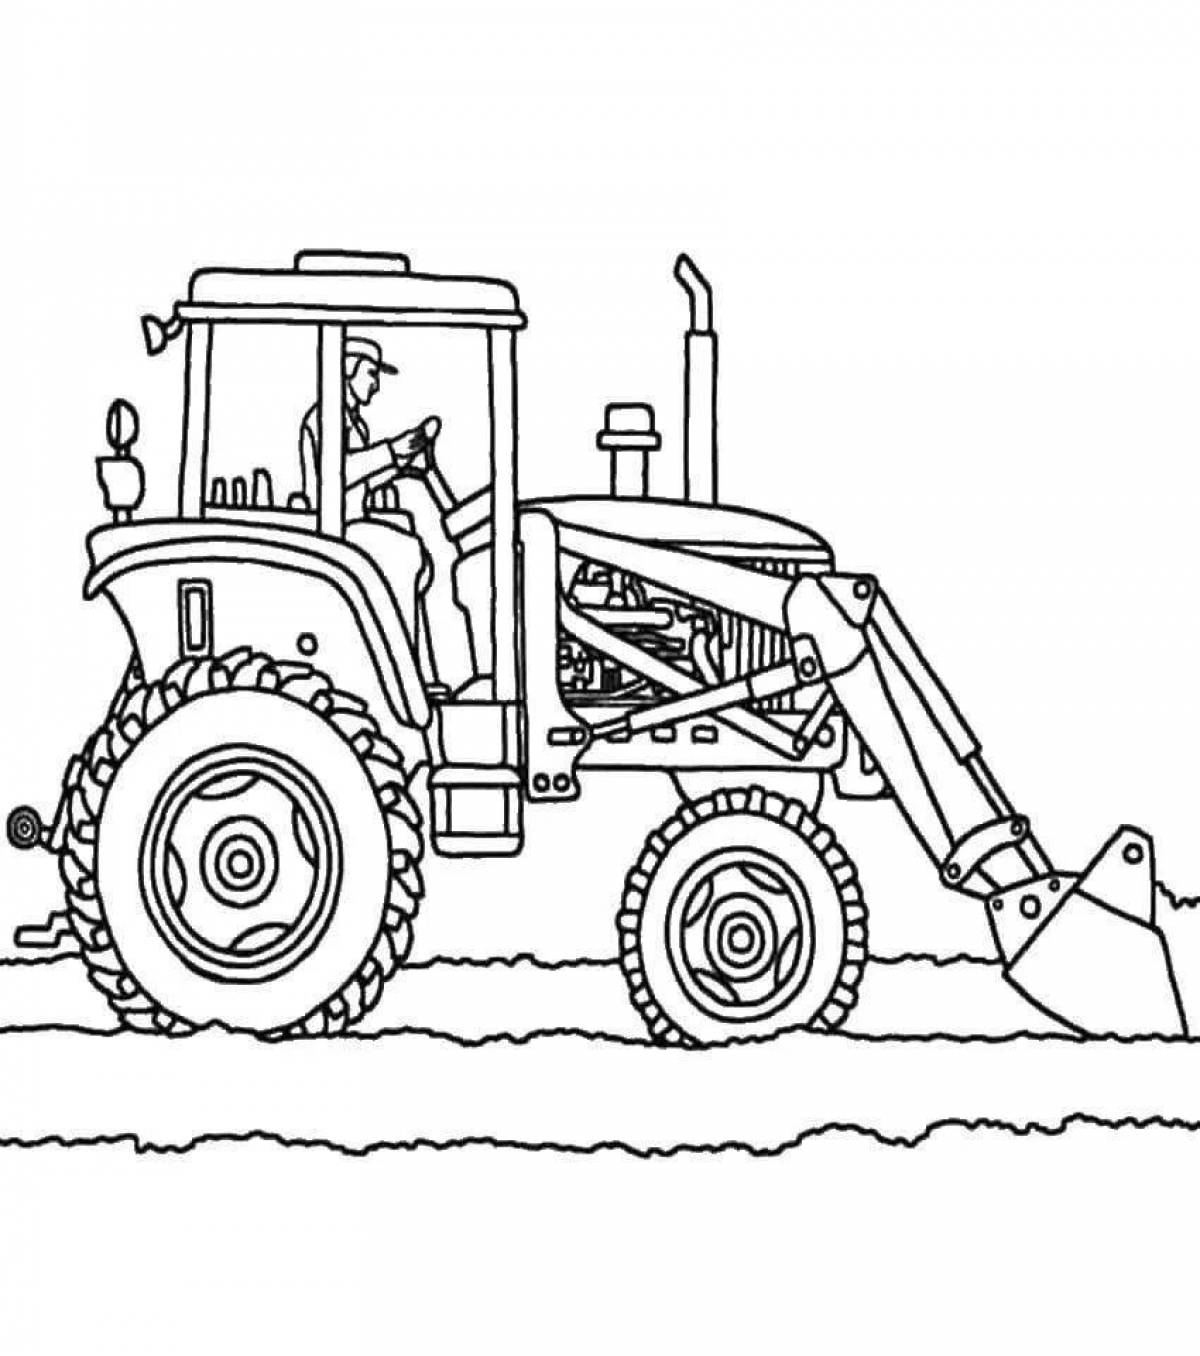 Tractor car bright coloring page